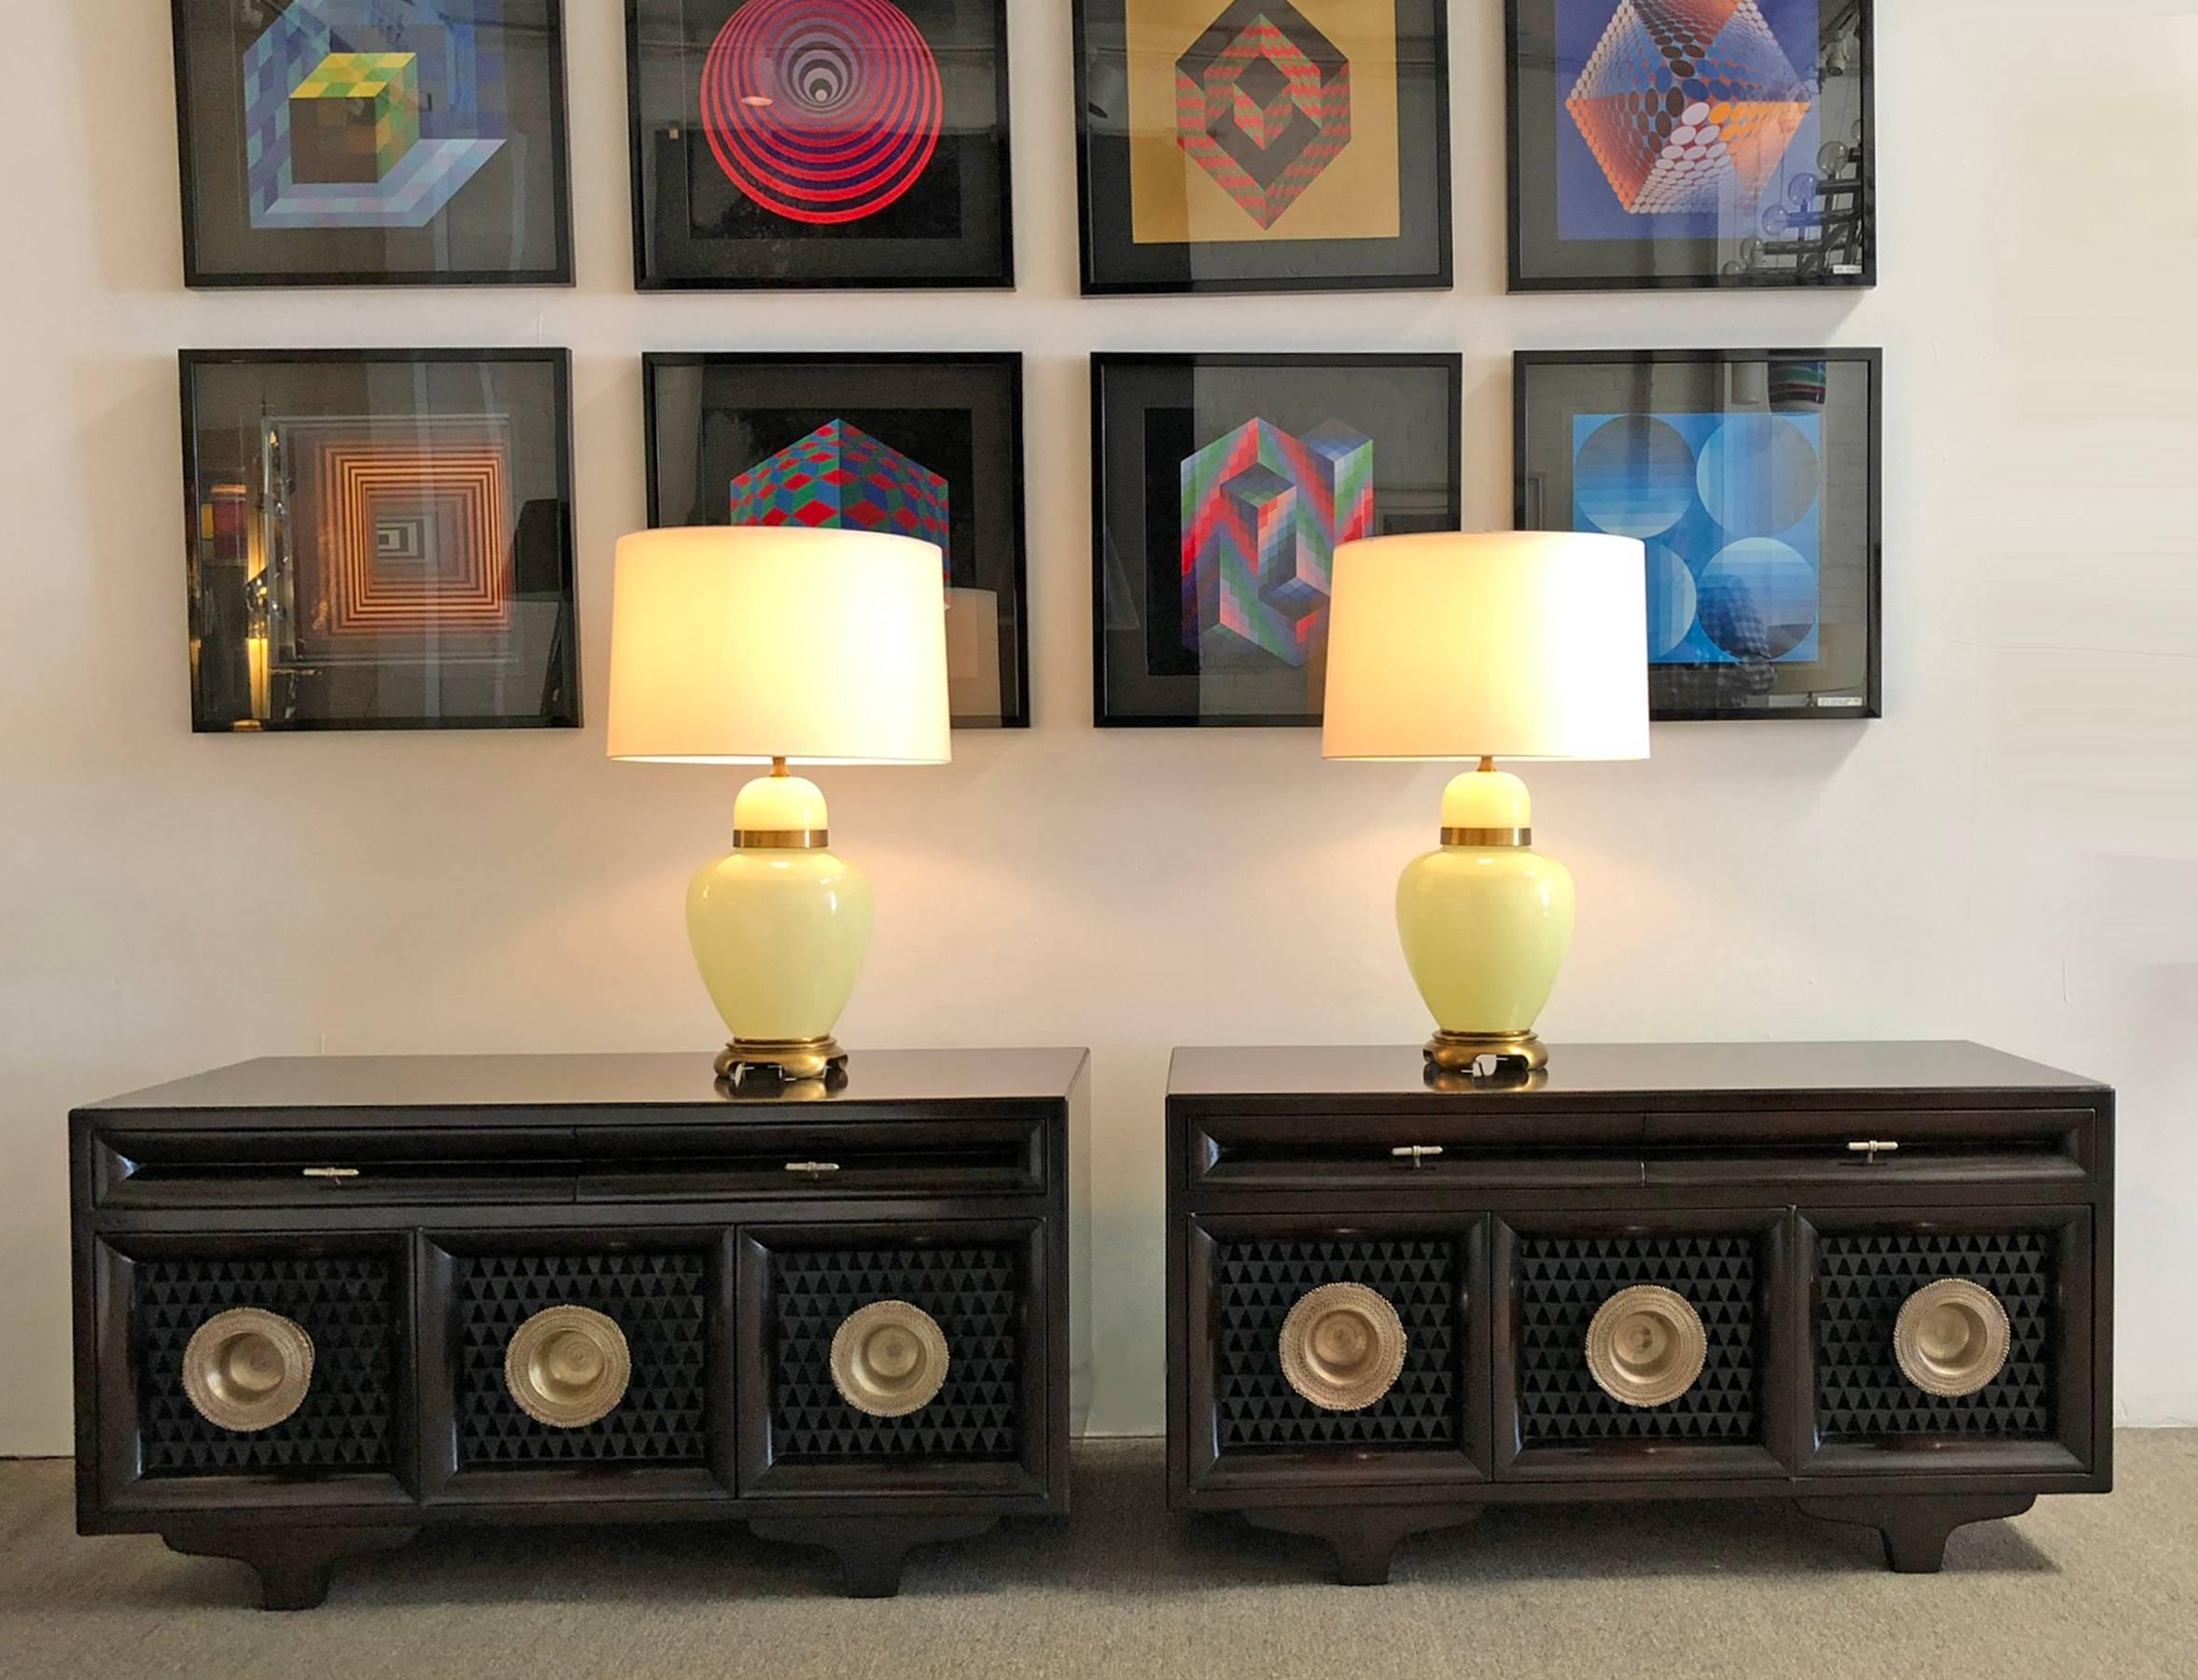 Pair of matching custom cabinets, nightstands or end tables. From a Beverly Hills, California home. Featuring finished mahogany exteriors, original blue interiors and backs, silvered pulls, and perforated doors. Top quality materials and design.